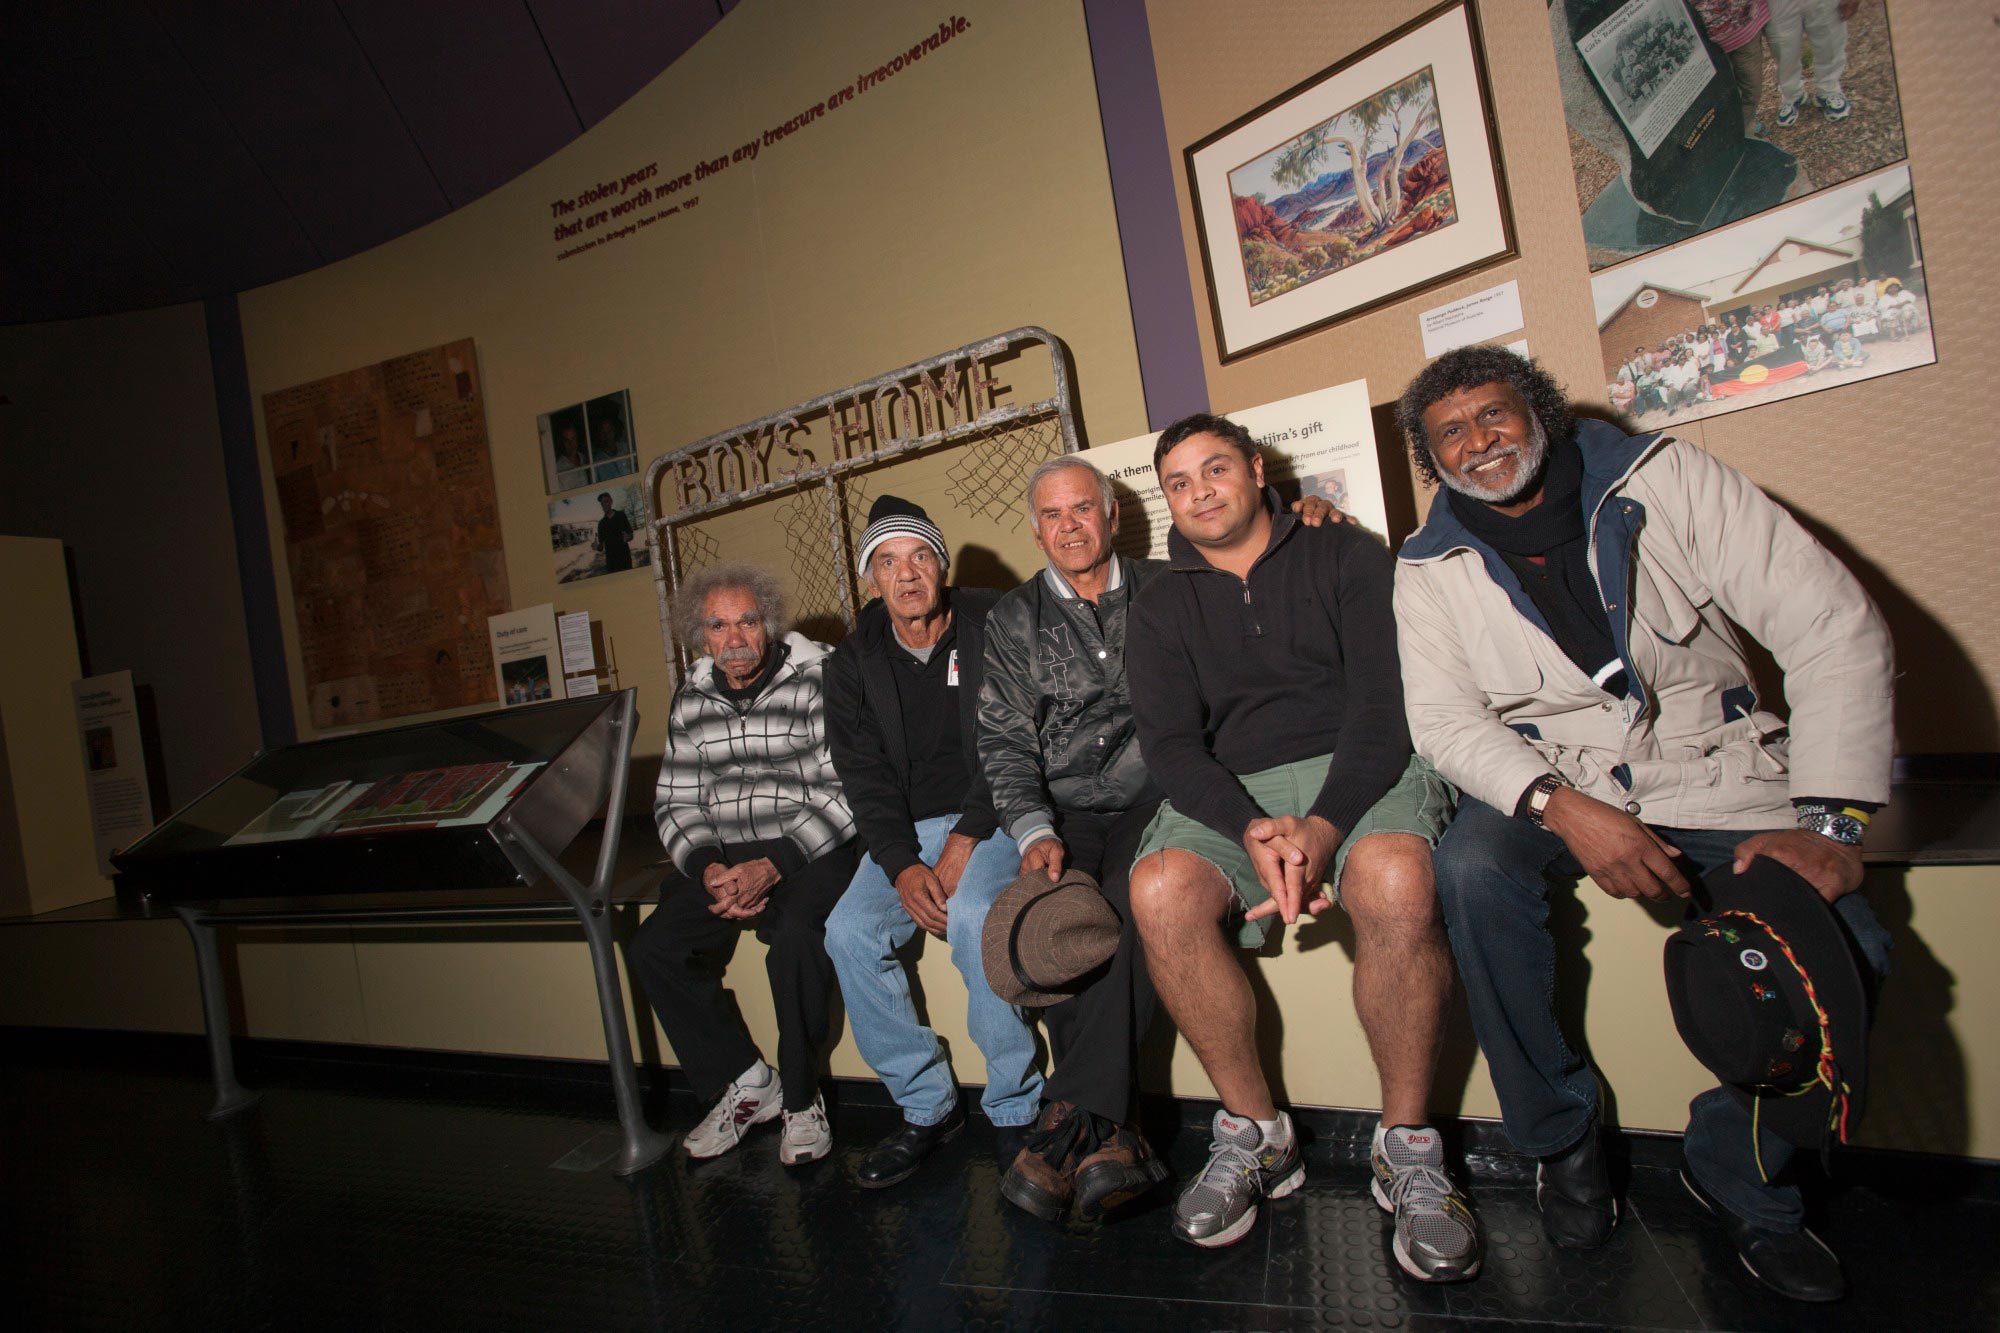 <p>Stolen Generations members Cecil Bowden, Manuel Ebsworth and Michael Welsh, accompanied by Jason Pitt and Pastor Ray Minniecon, in front of the gate from Kinchela Boys Home, at the National Museum of Australia, 7 June 2013</p>
